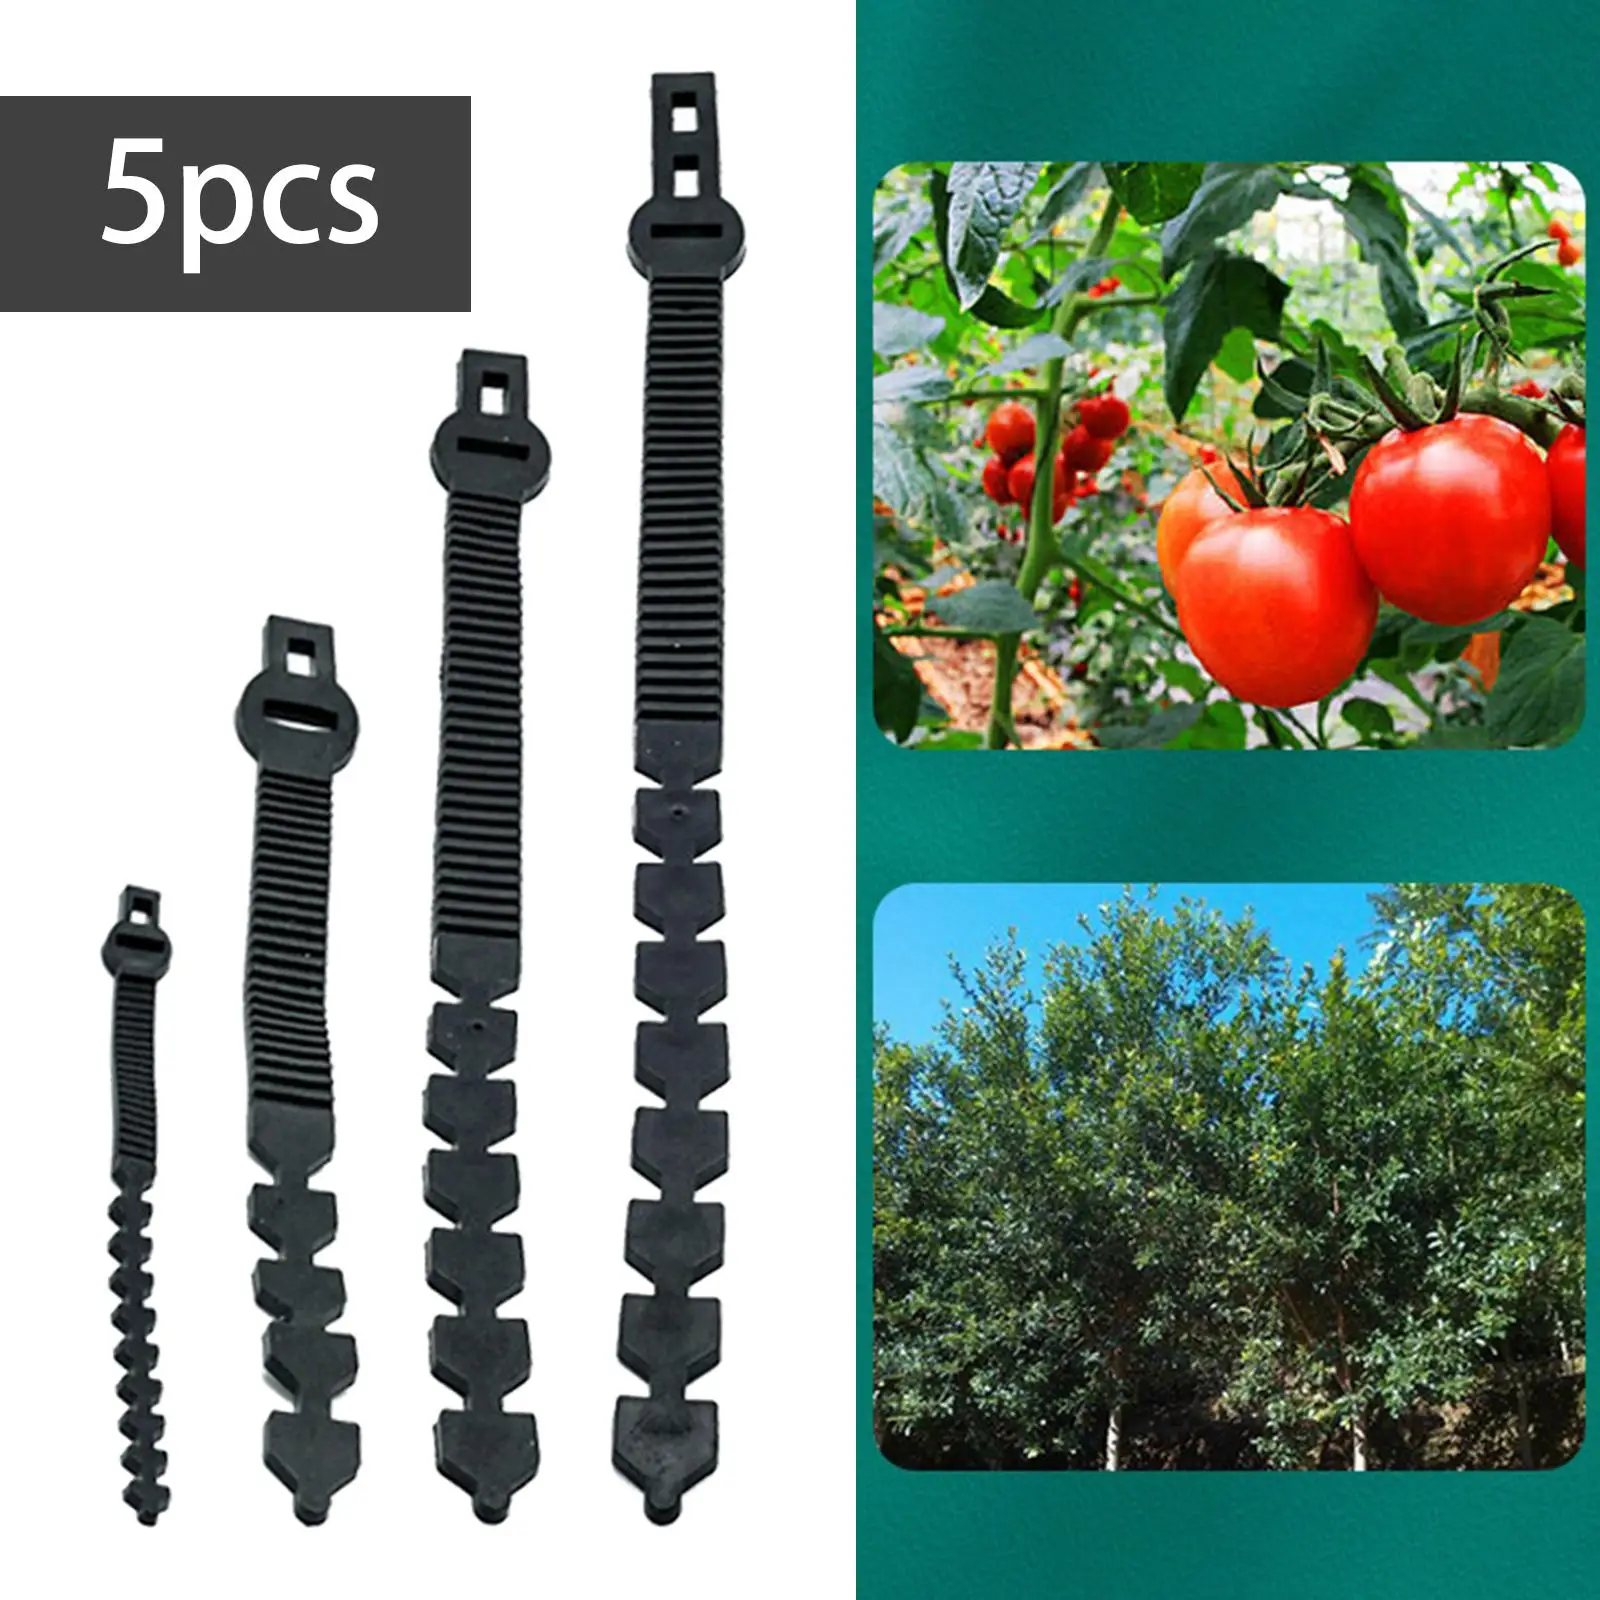 5Pcs Tree Plant Ties Tree Ties Straps Supports for Outdoor Plant Shrub